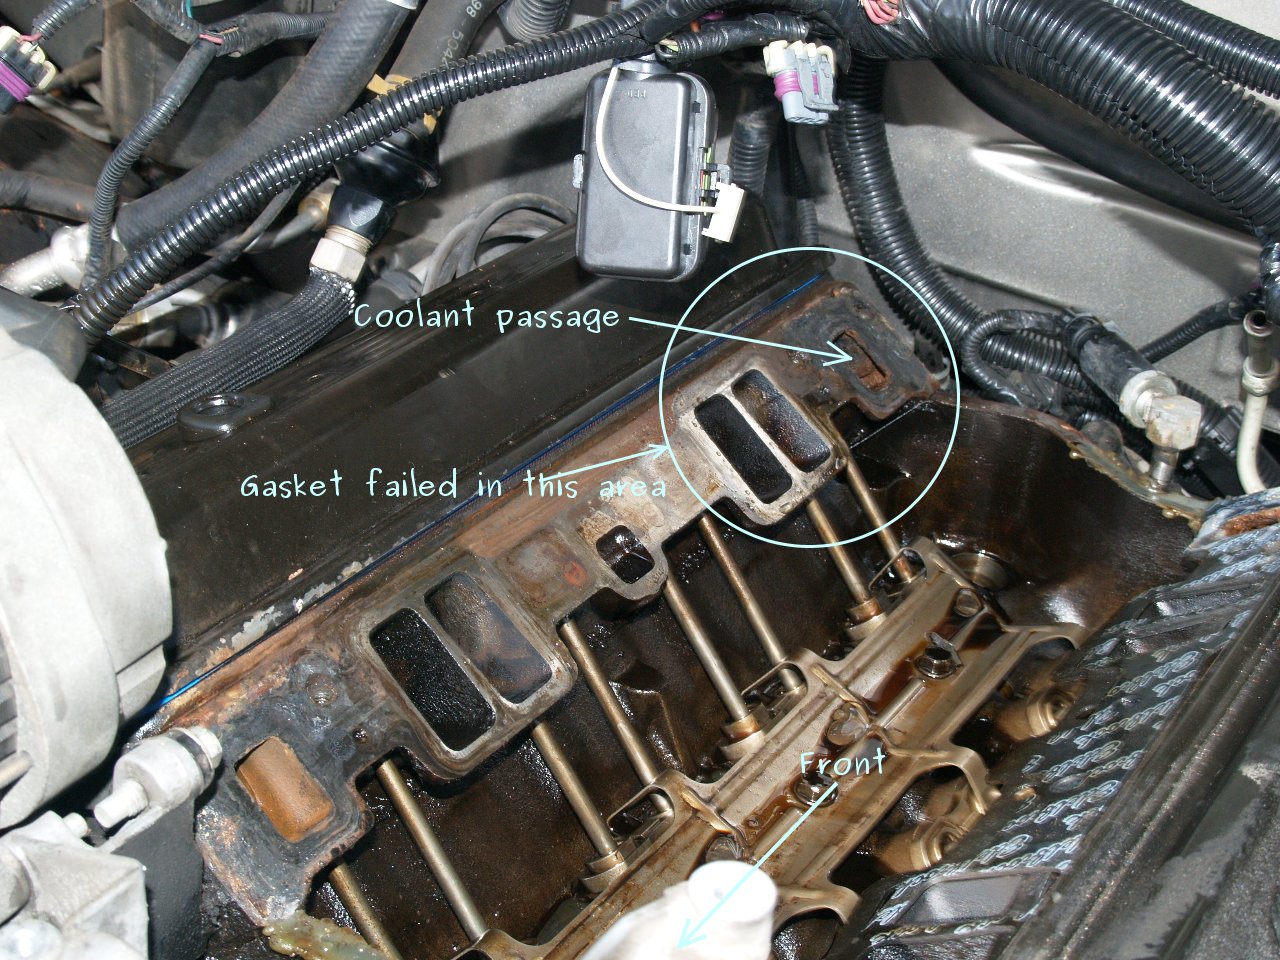 See P0136 in engine